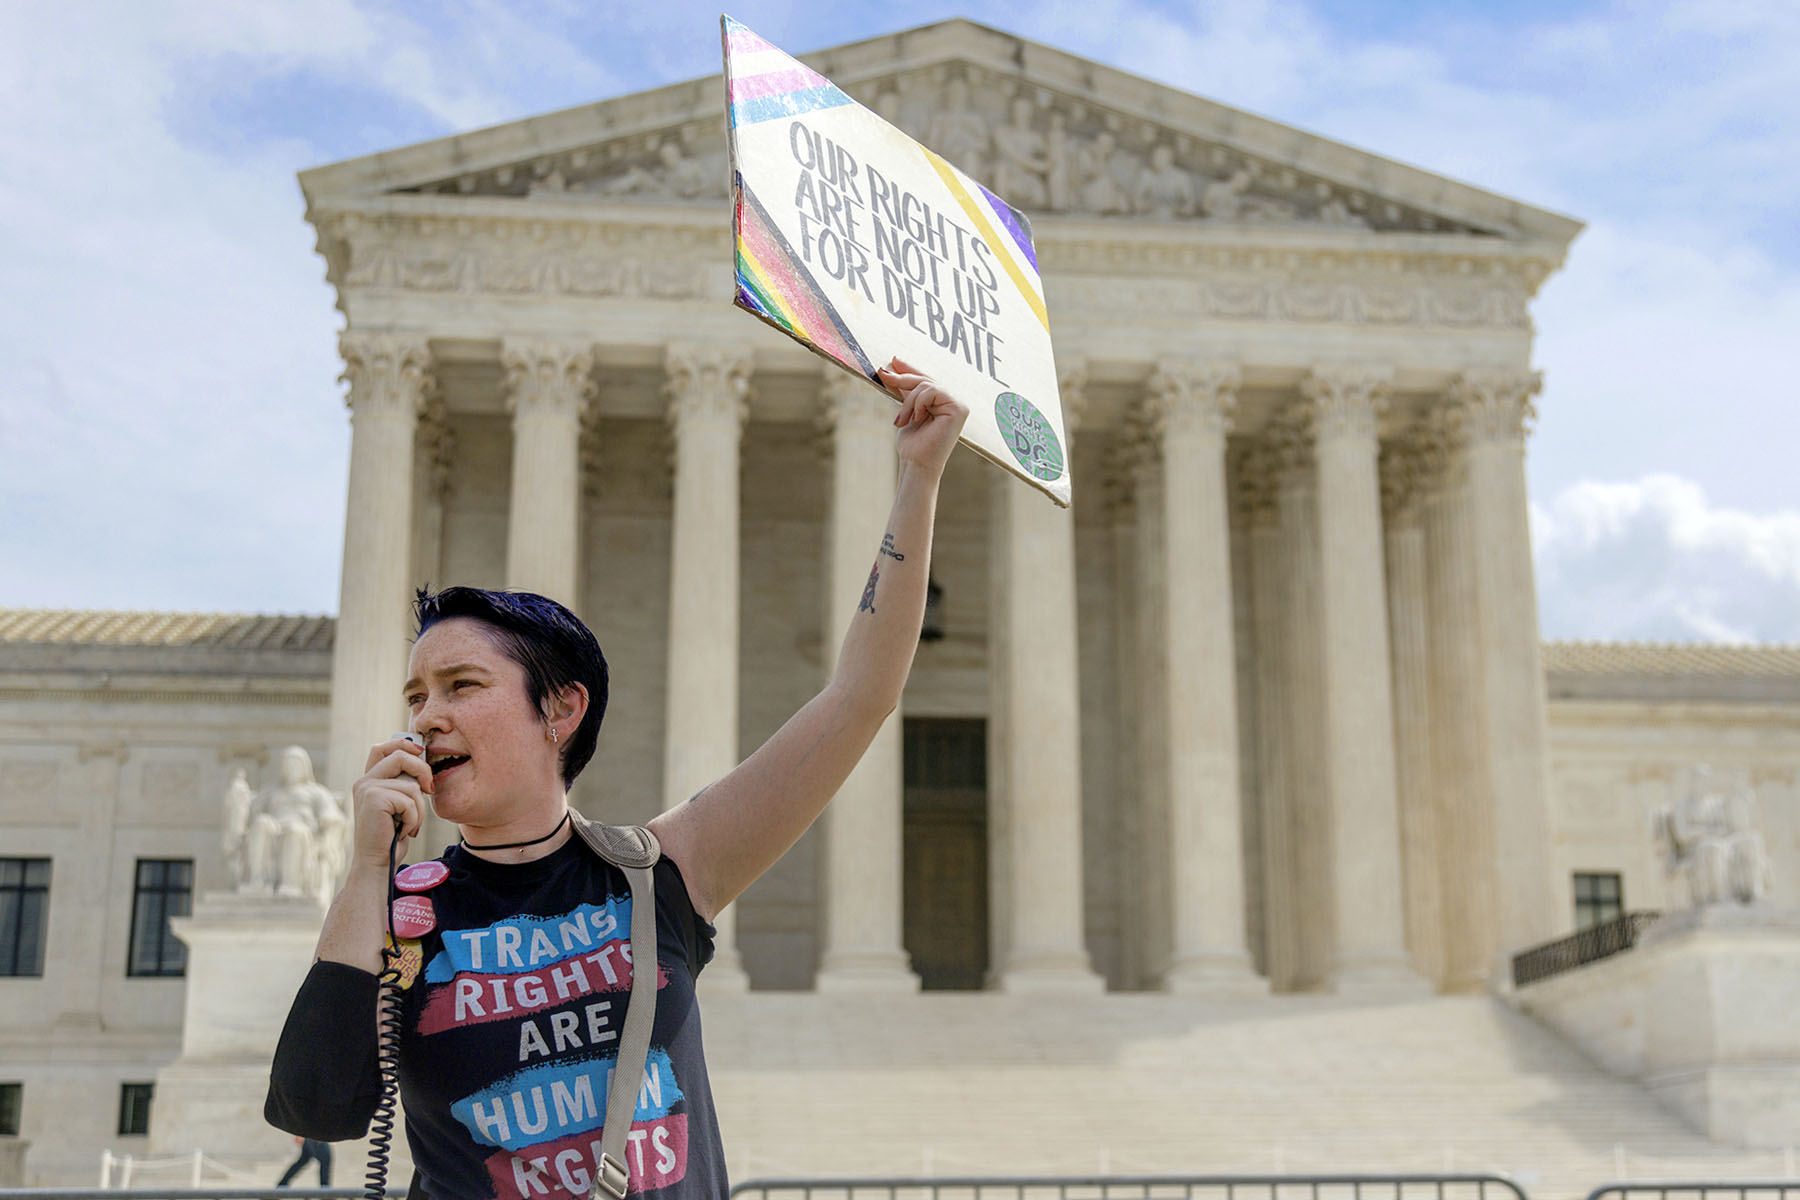 A demonstrator outside the Supreme Court in Washington, D.C. wears a "Trans Rights are human rights" shirt and speaks into a megaphone.